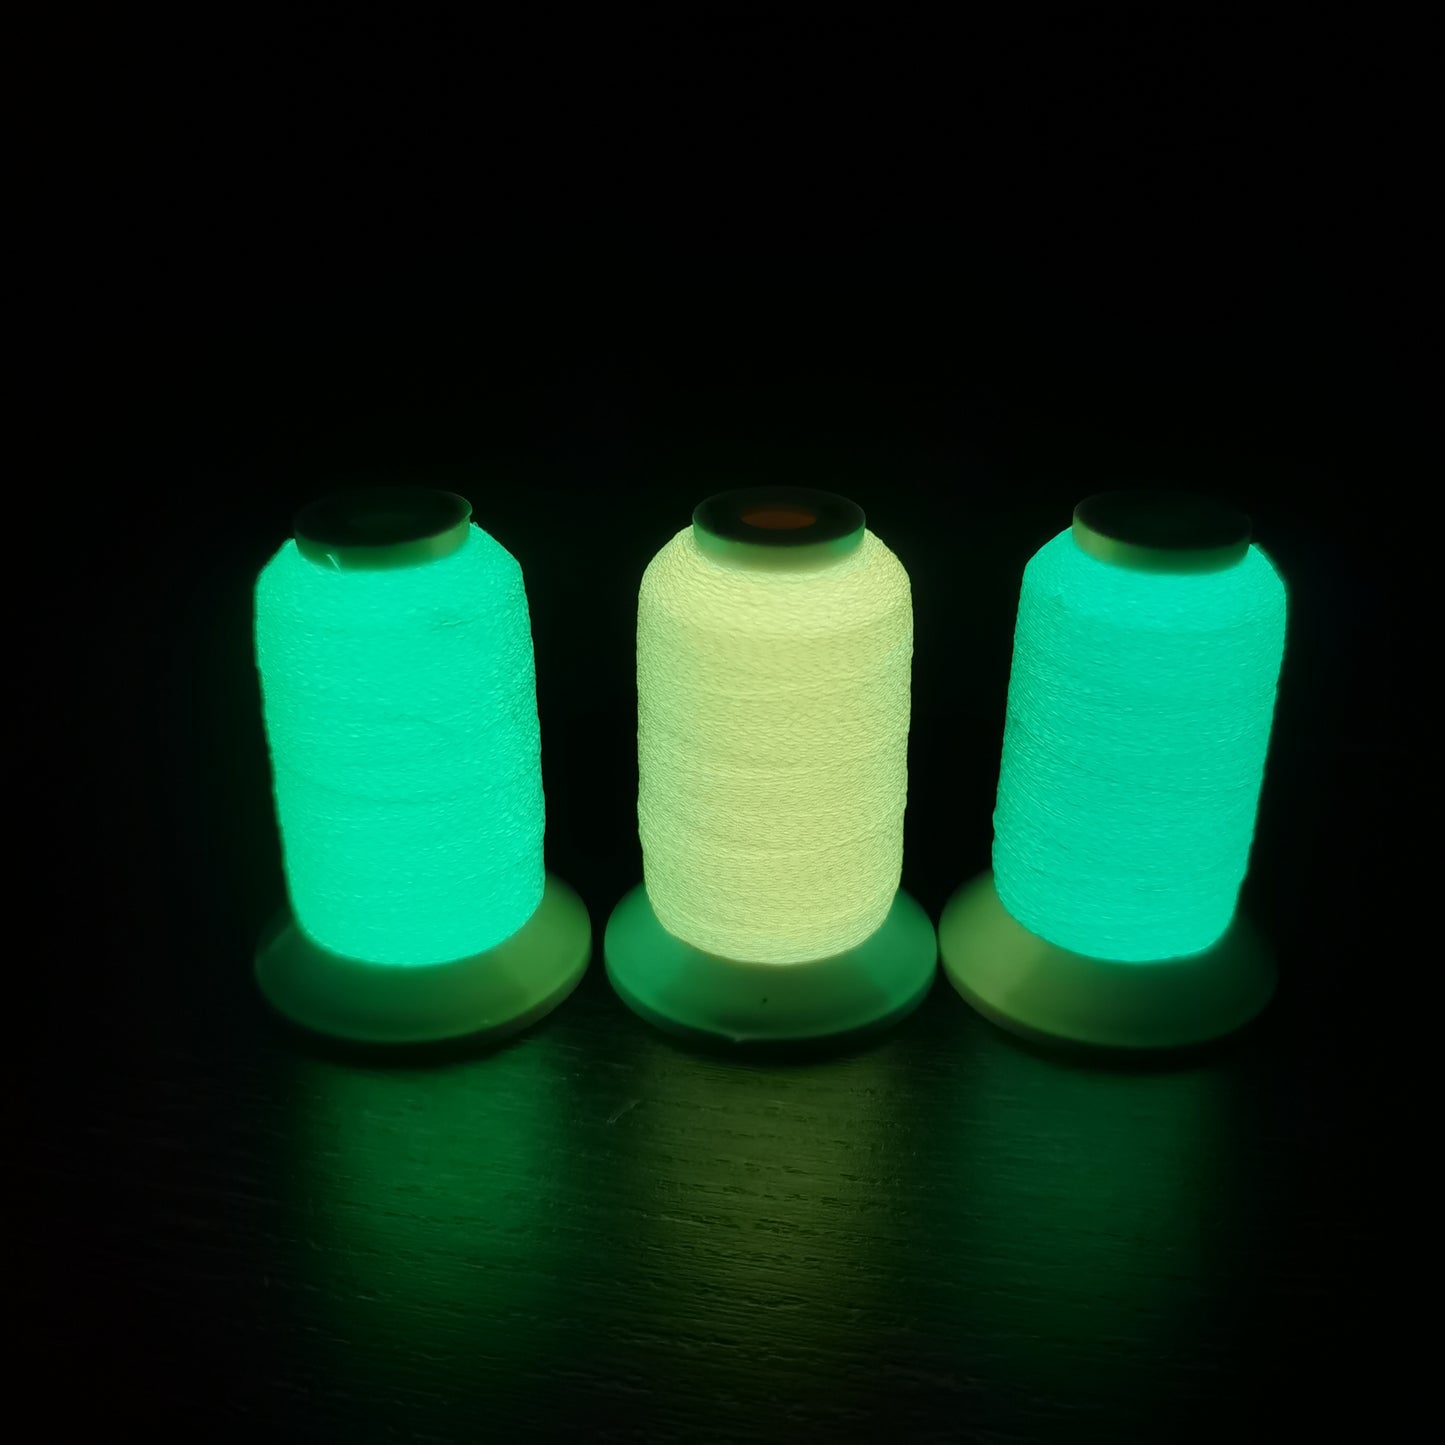 200m High Bright Glow in the dark fluorescent Embroidery Thread Kit (Custom label supported)